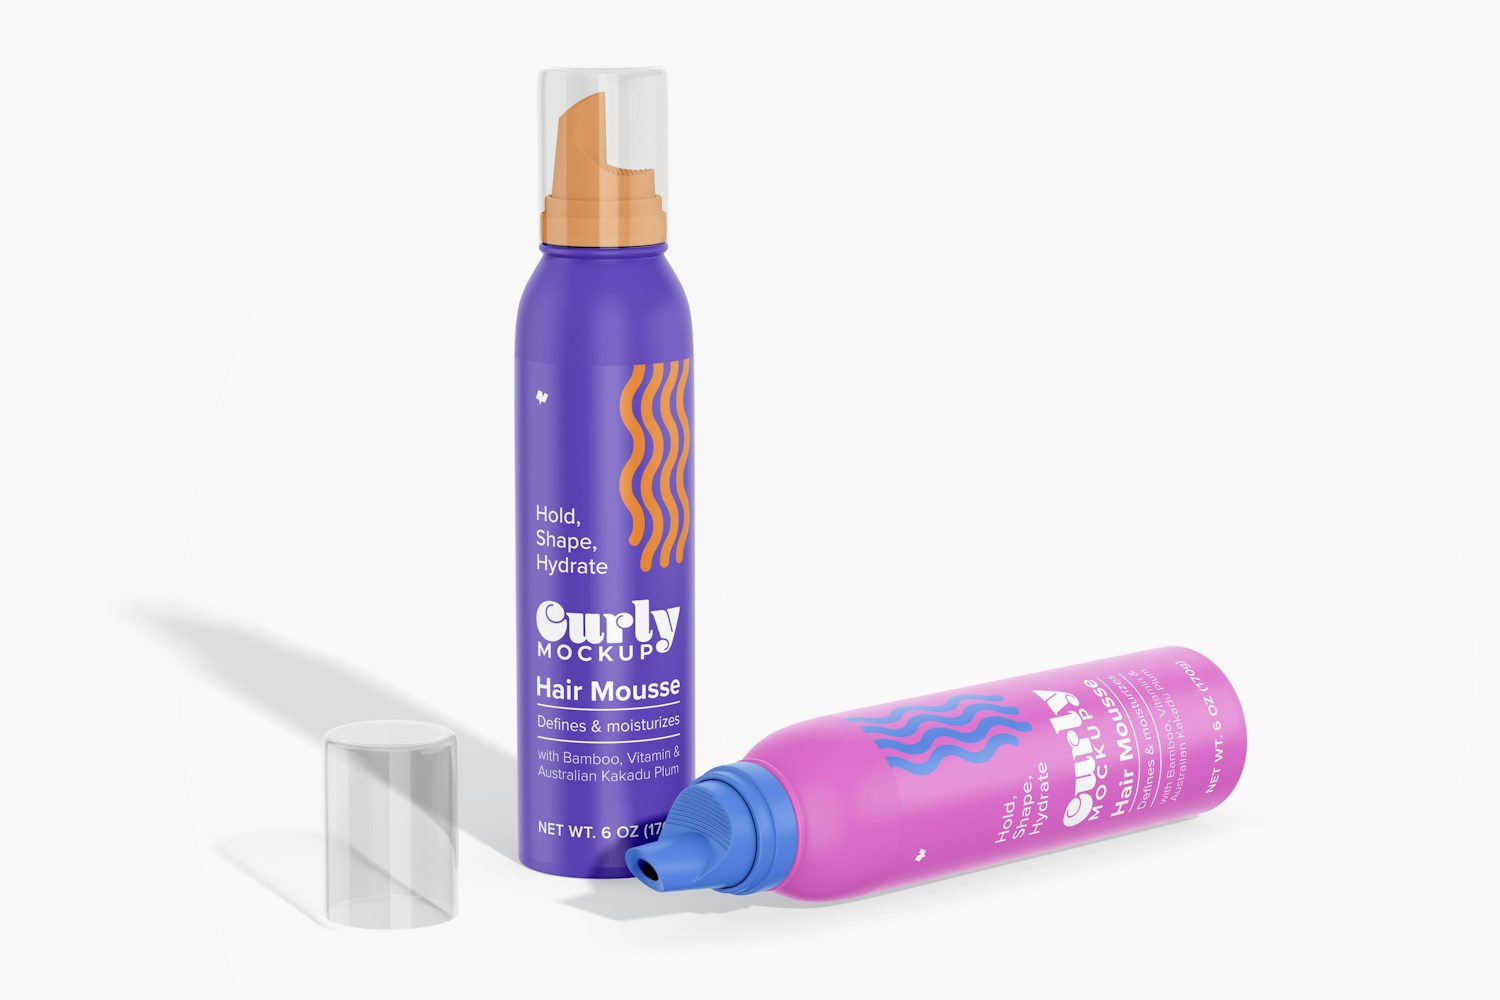 Hair Mousse Bottles Mockup, Standing and Dropped